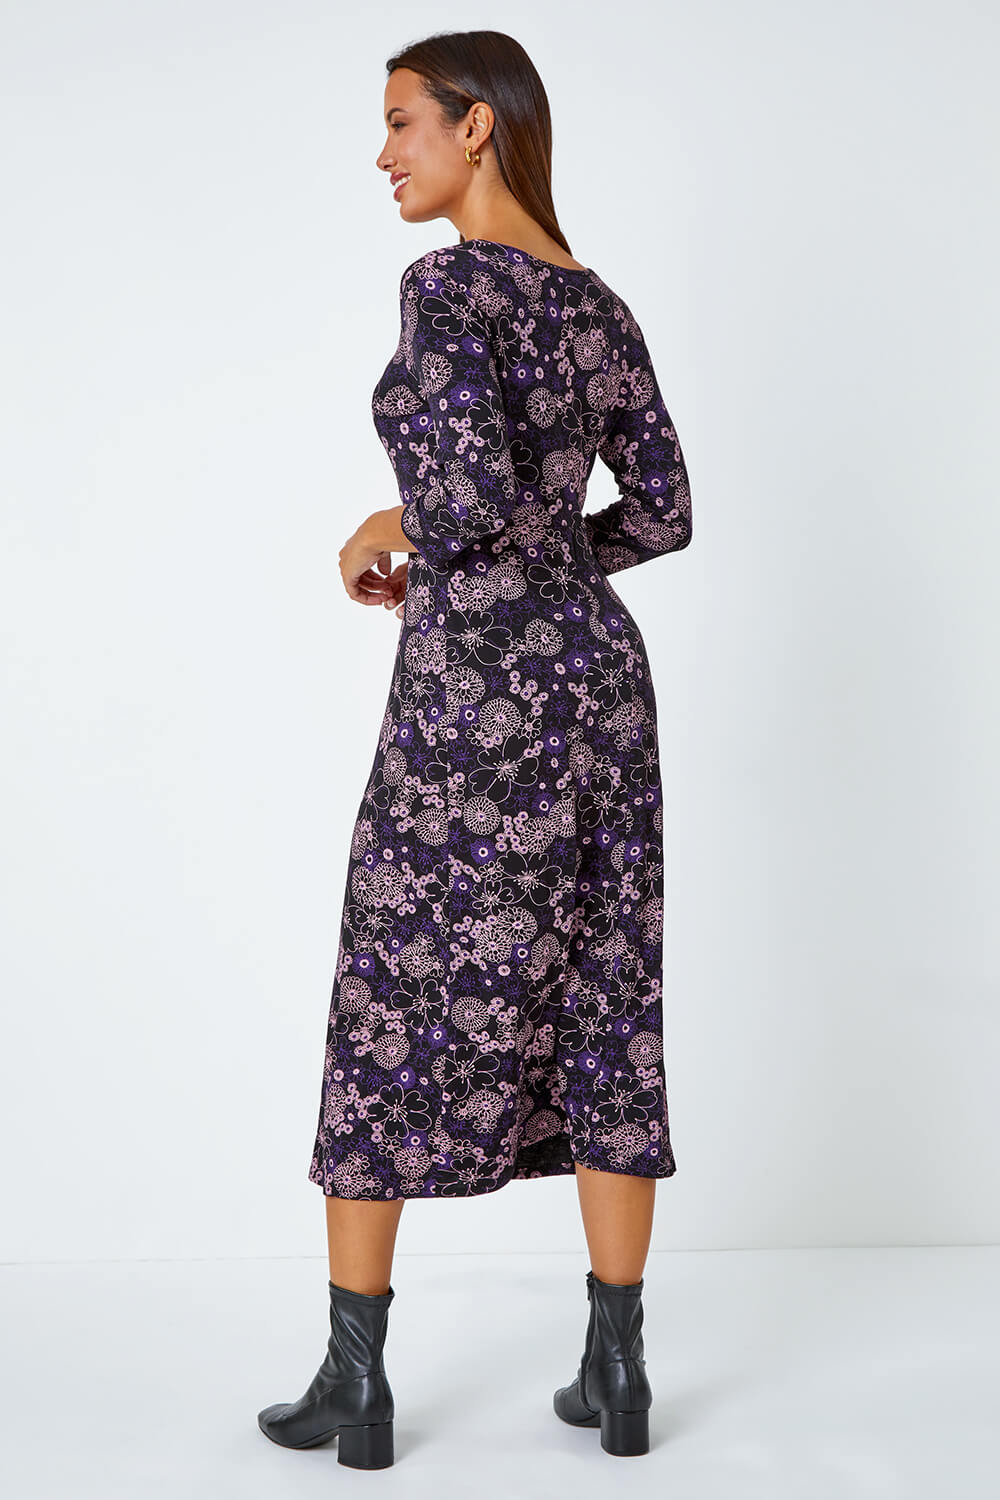 Purple Floral Print Ruched Midi Stretch Dress, Image 3 of 5